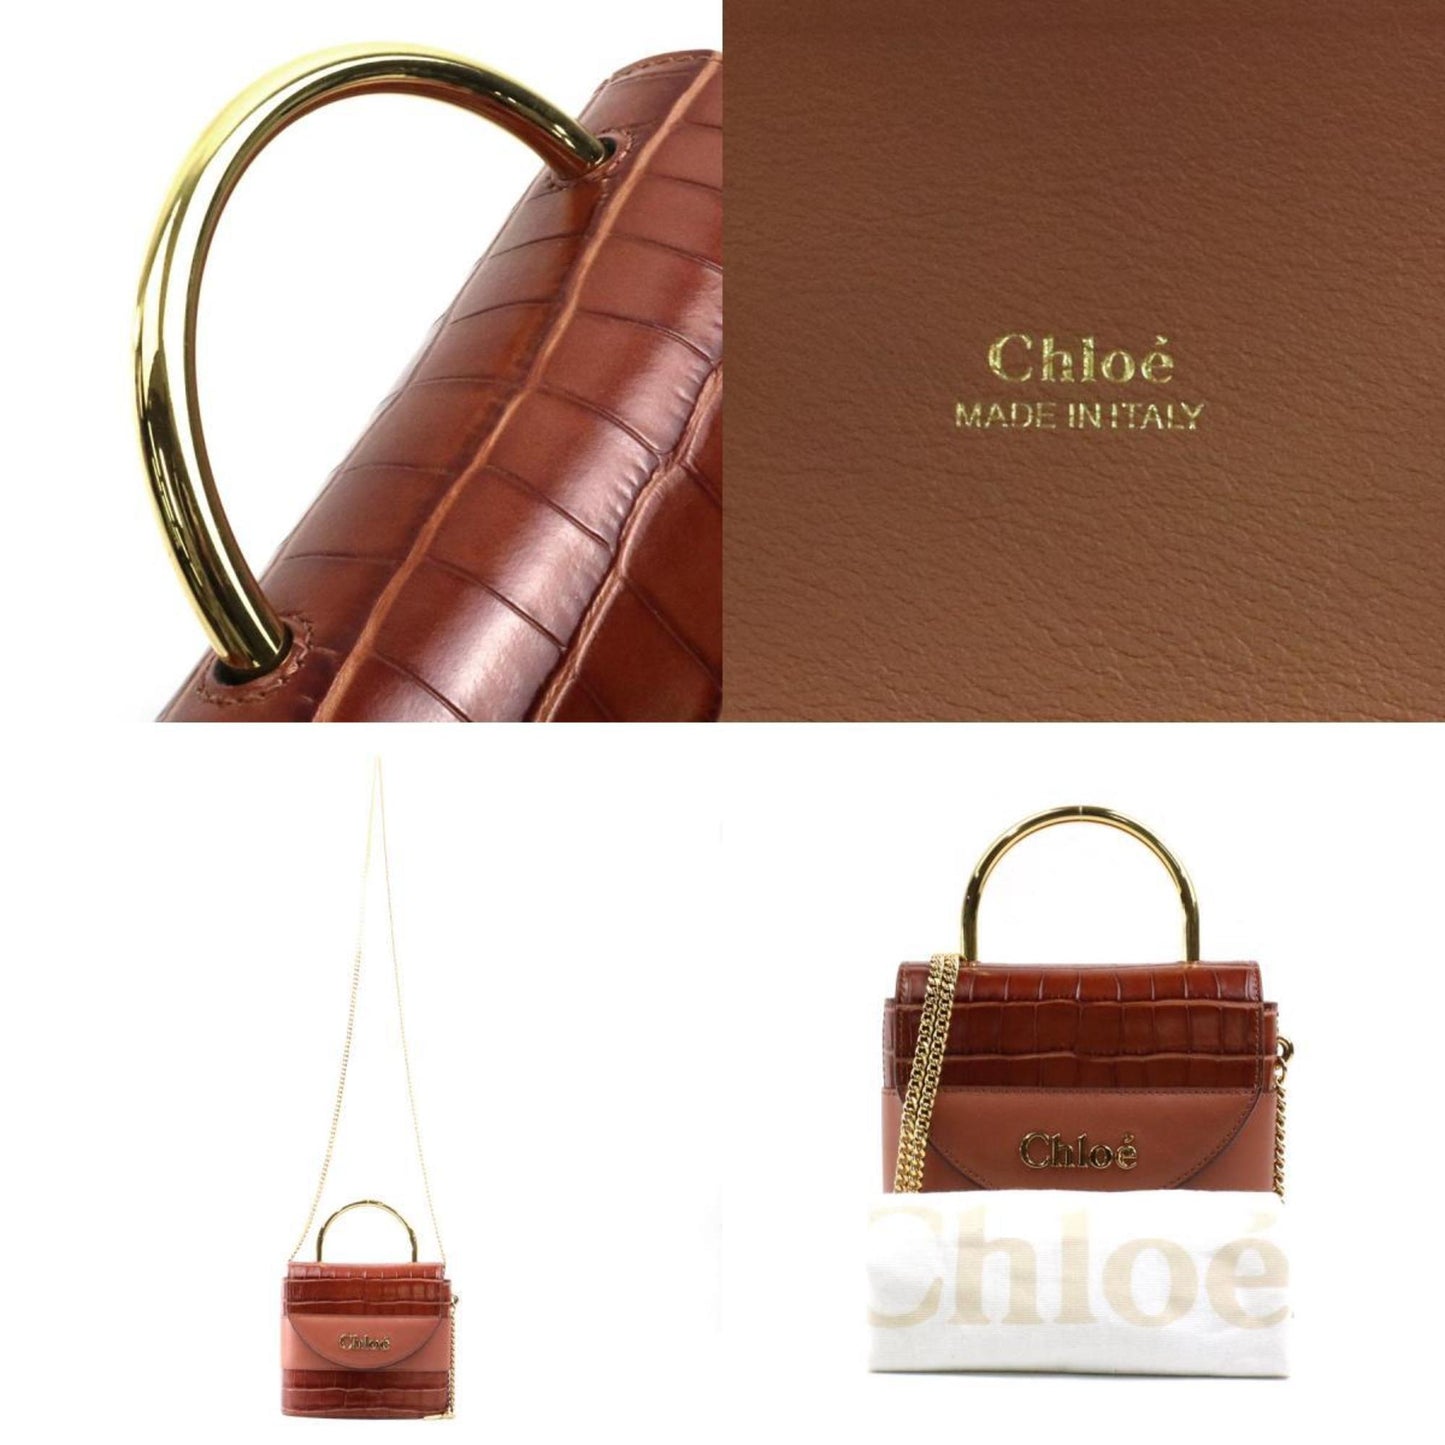 Chloe Women's Leather Shoulder Bag with Timeless Design in Brown